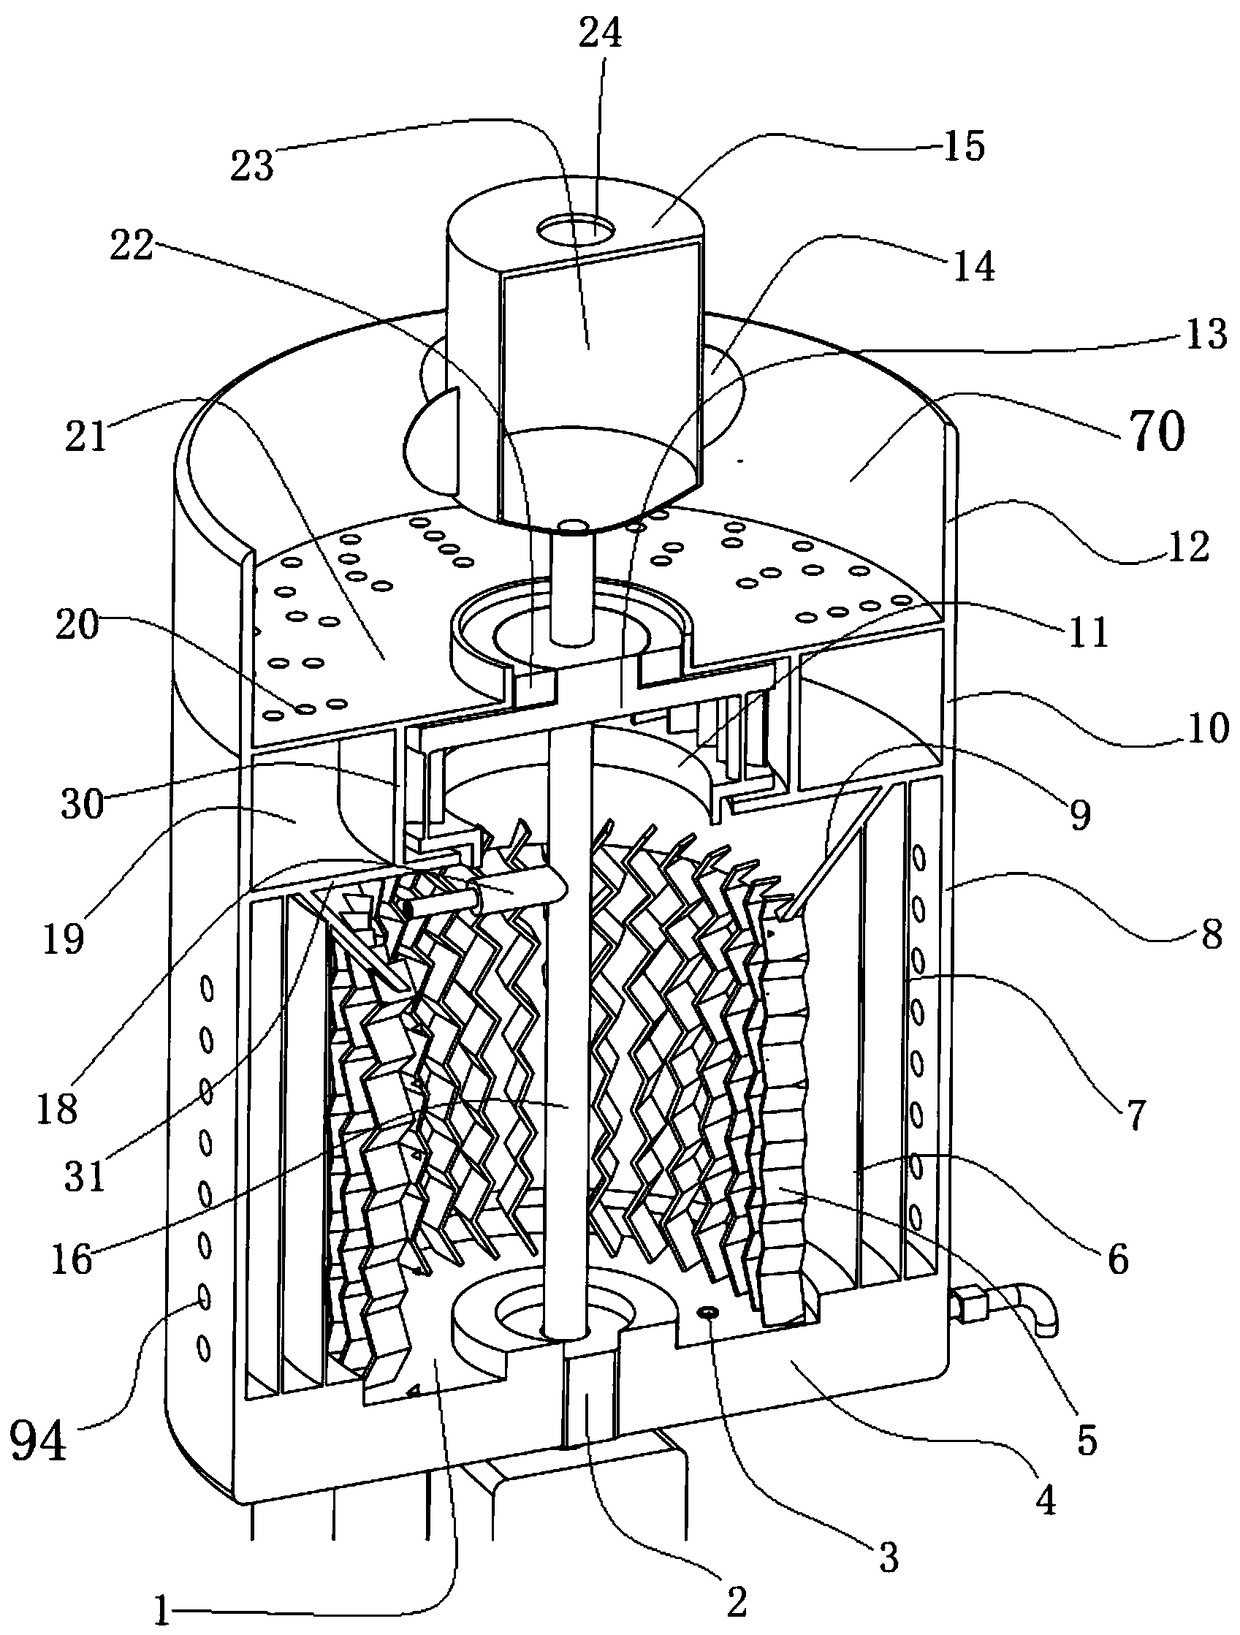 Air purification device and method thereof based on positive and negative ion generator